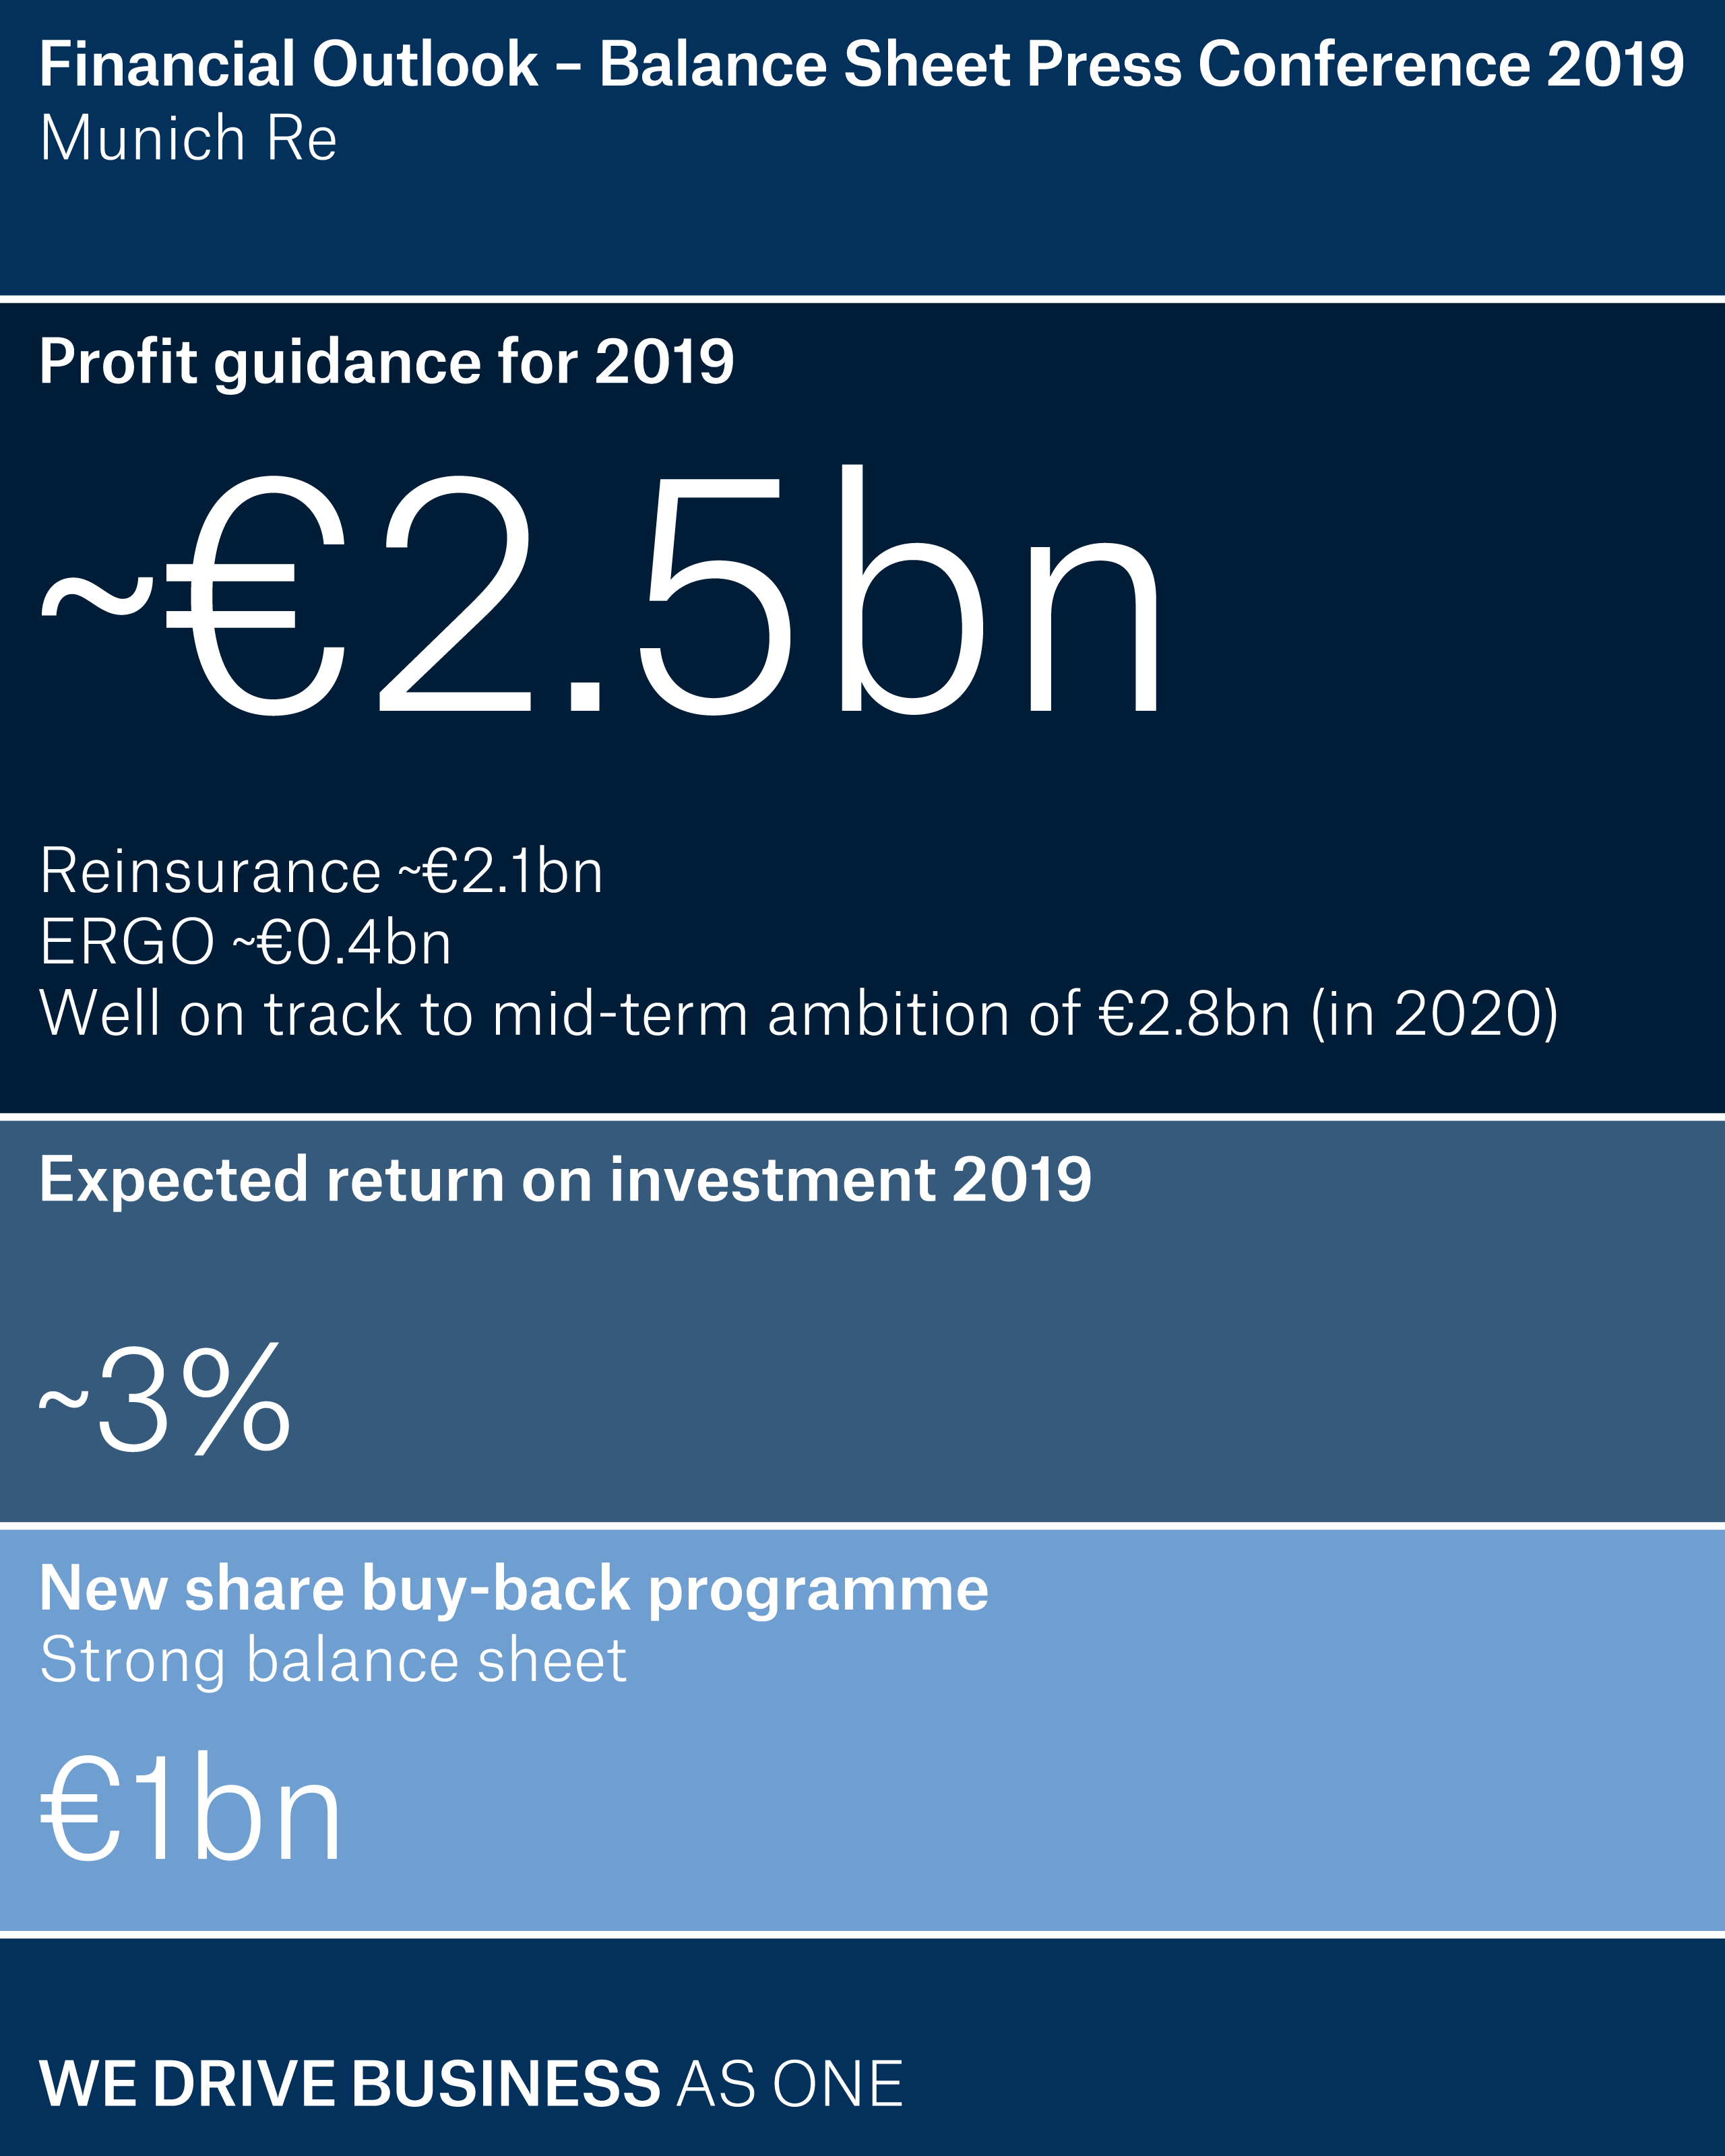 Outlook for 2019: Group profit guidance of around €2.5bn Munich Re is targeting a rise in profit of €200m to around €2.5bn for the current year, of which around €2.1bn is attributable to reinsurance and around €0.4bn to ERGO.